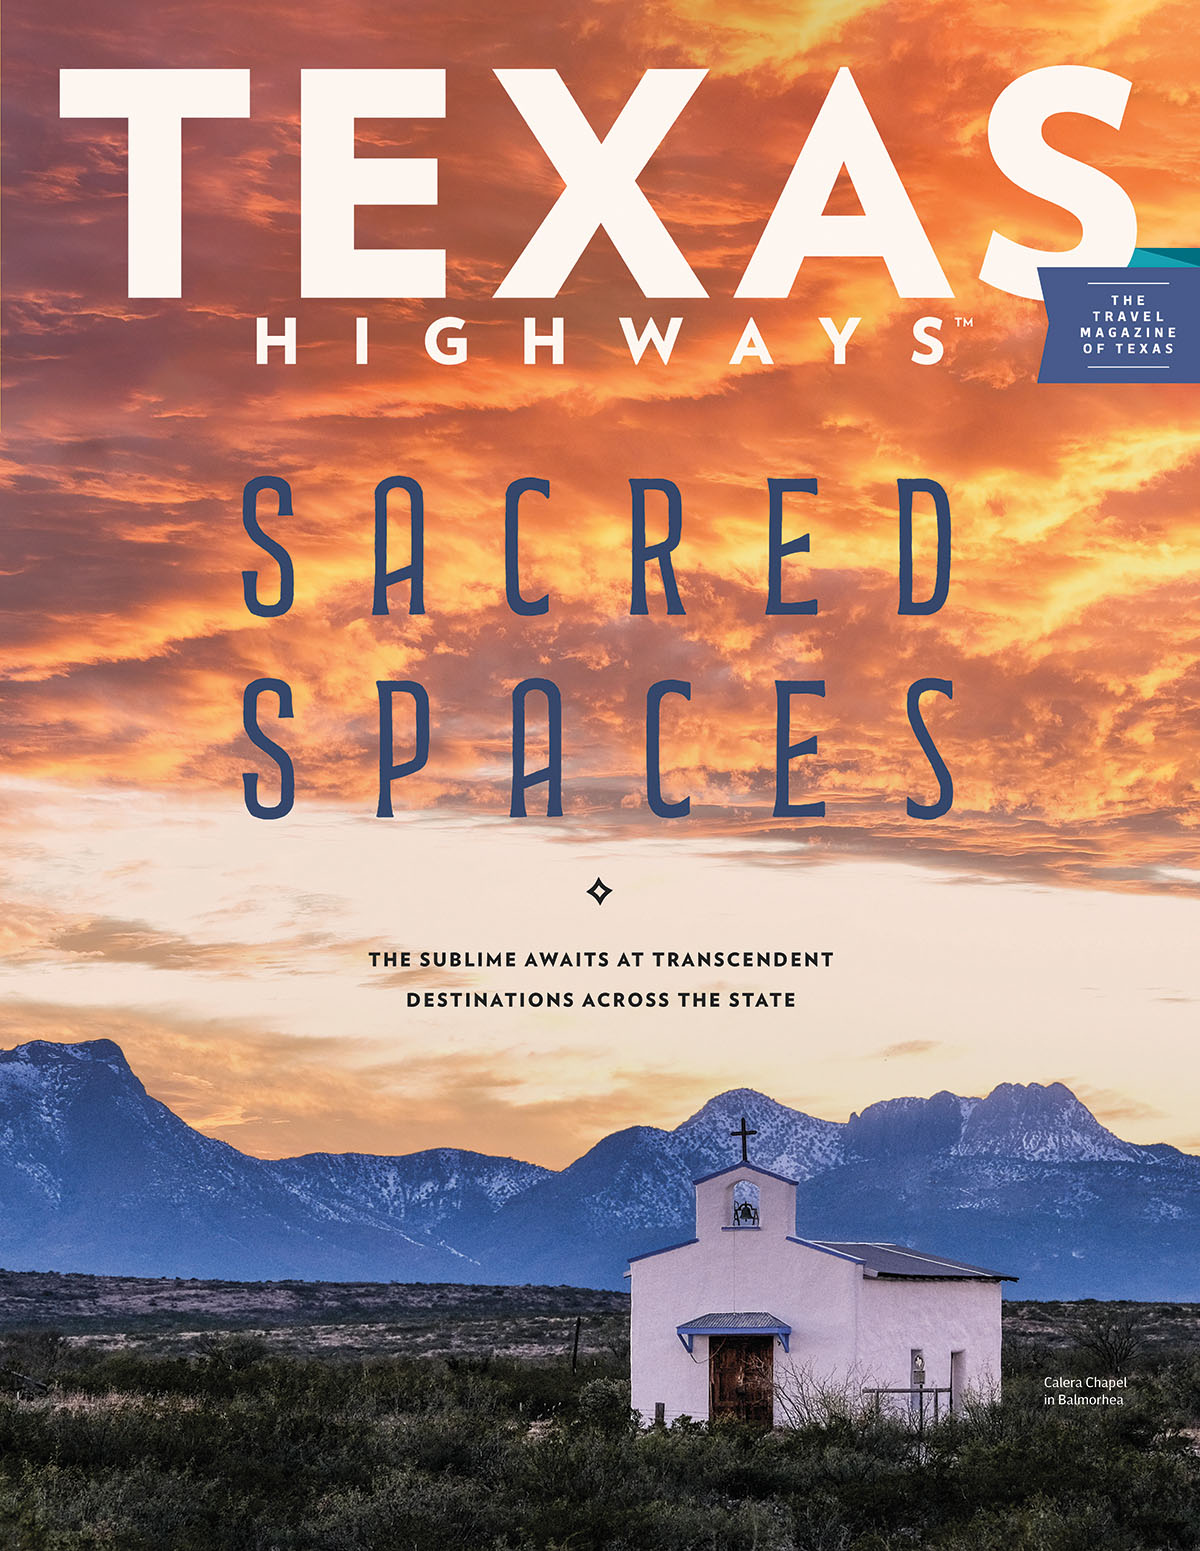 The January 2023 cover of Texas Highways Magazine, "The 2023 Travel Bucket List"